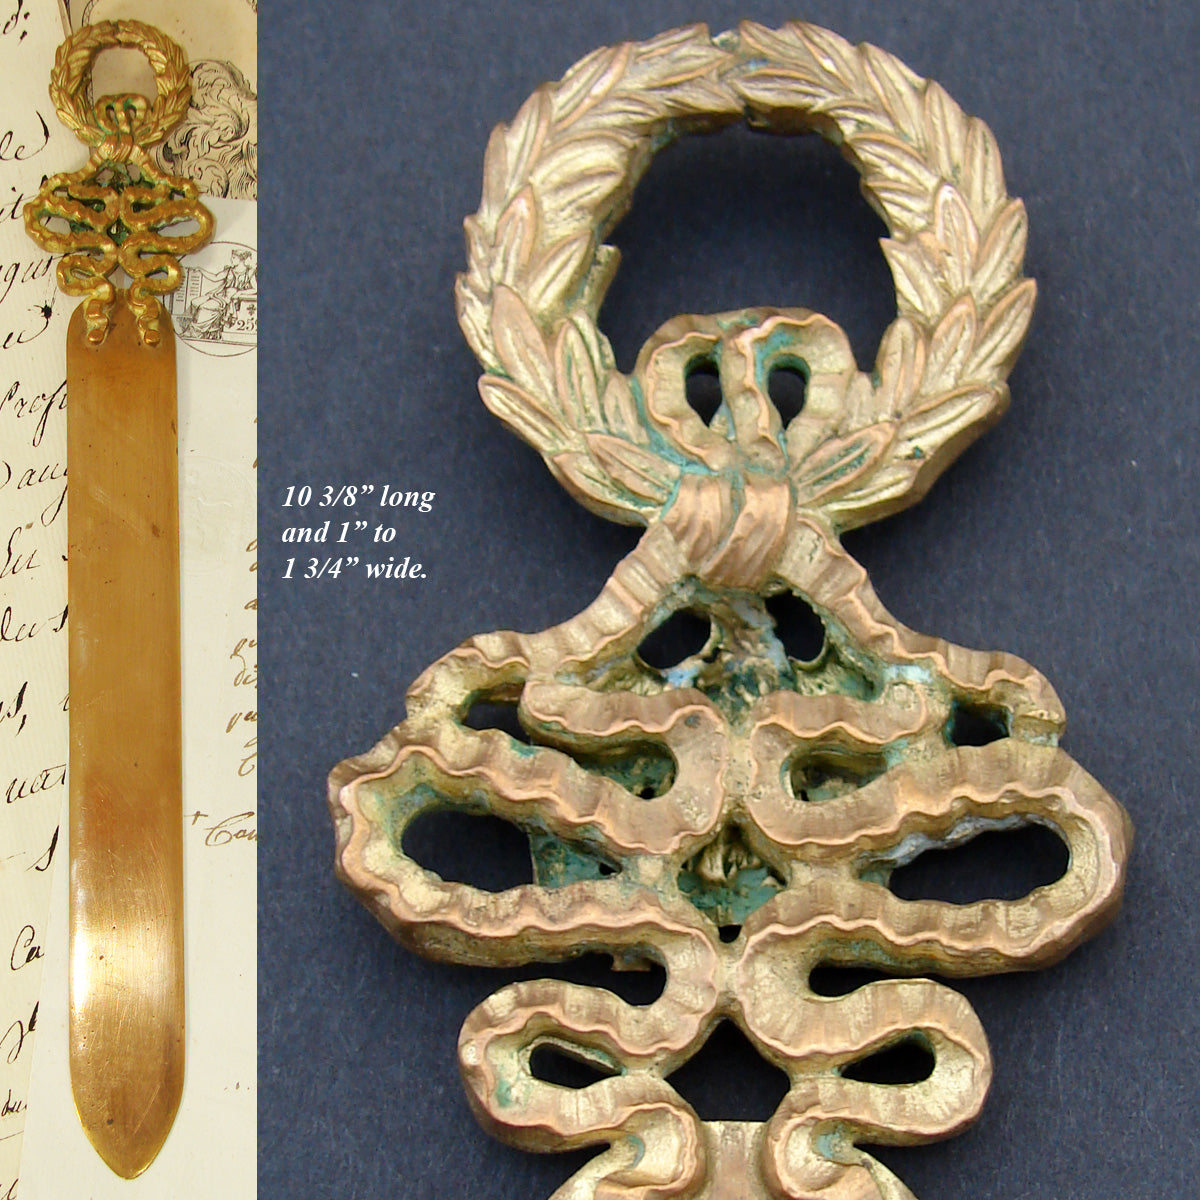 Antique French Empire Revival 10.5" Gilt Bronze Letter Opener or Page Turner, Napoleonic Eagle